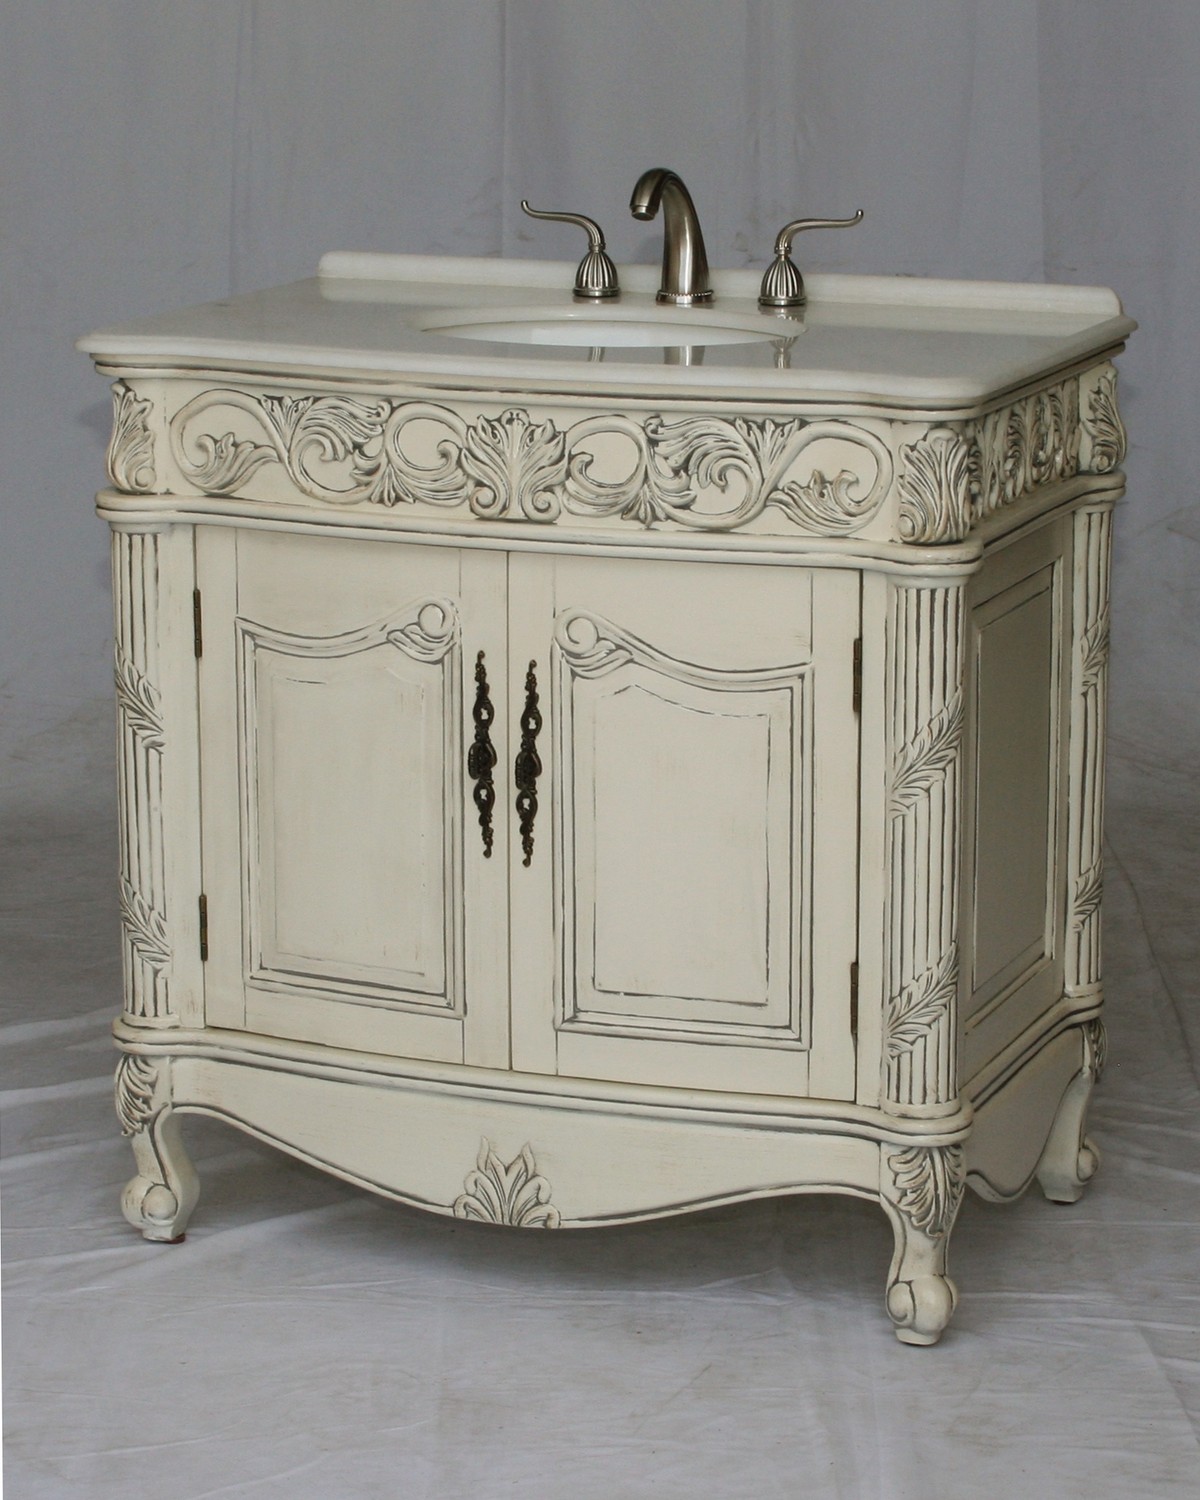 36" Adelina Antique Style Single Sink Bathroom Vanity with Imperial White Stone Countertop and Antique White Finish